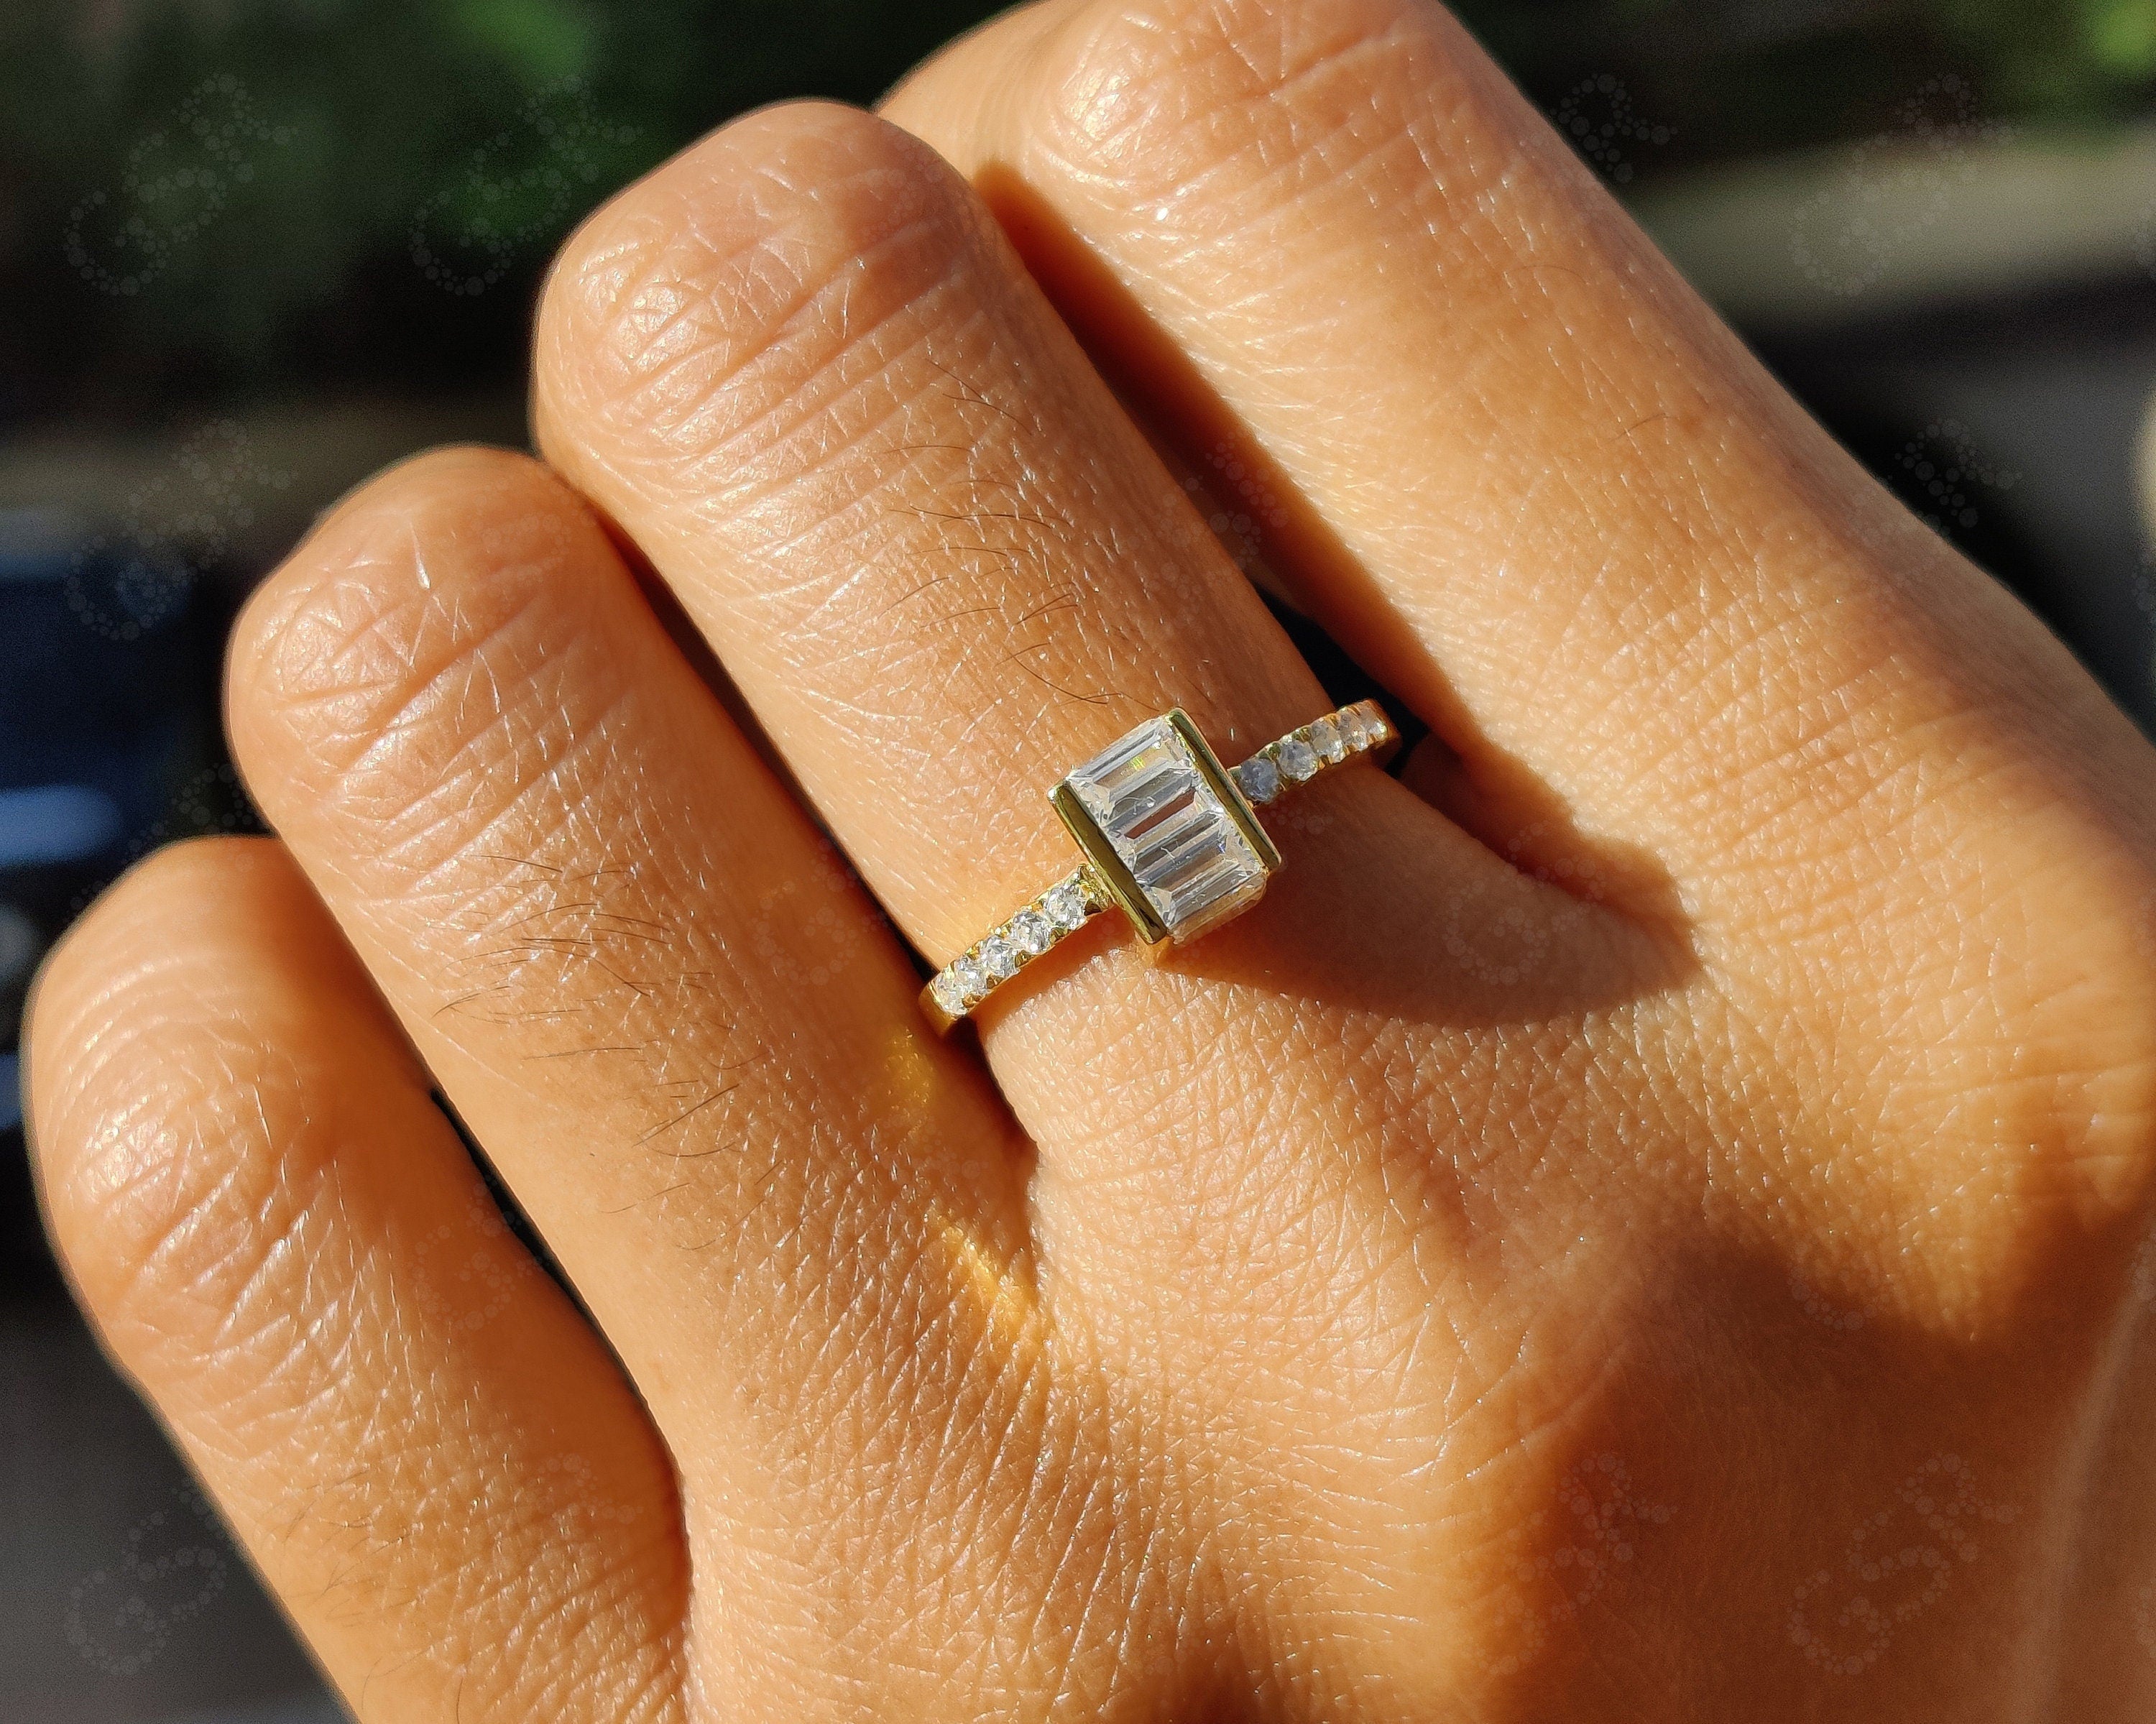 Baguette Moissanite Stacking Ring - Silver and Yellow Gold Stackable Ring - Unique Minimalist Jewelry Design - Dainty Promise Ring